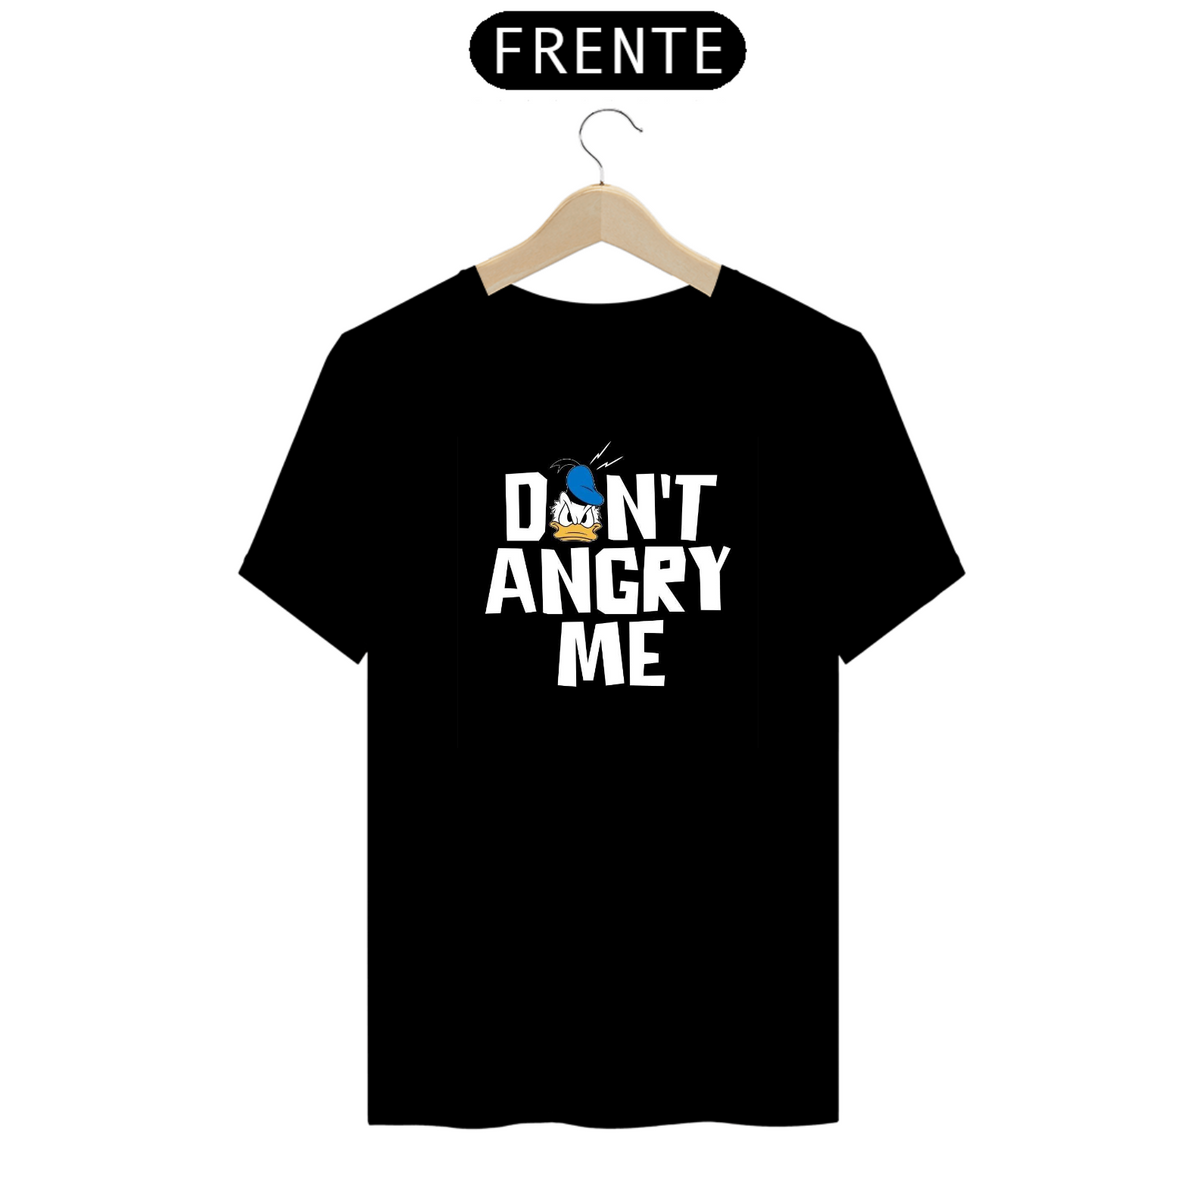 Nome do produto: Camisa - Don\'t angry me